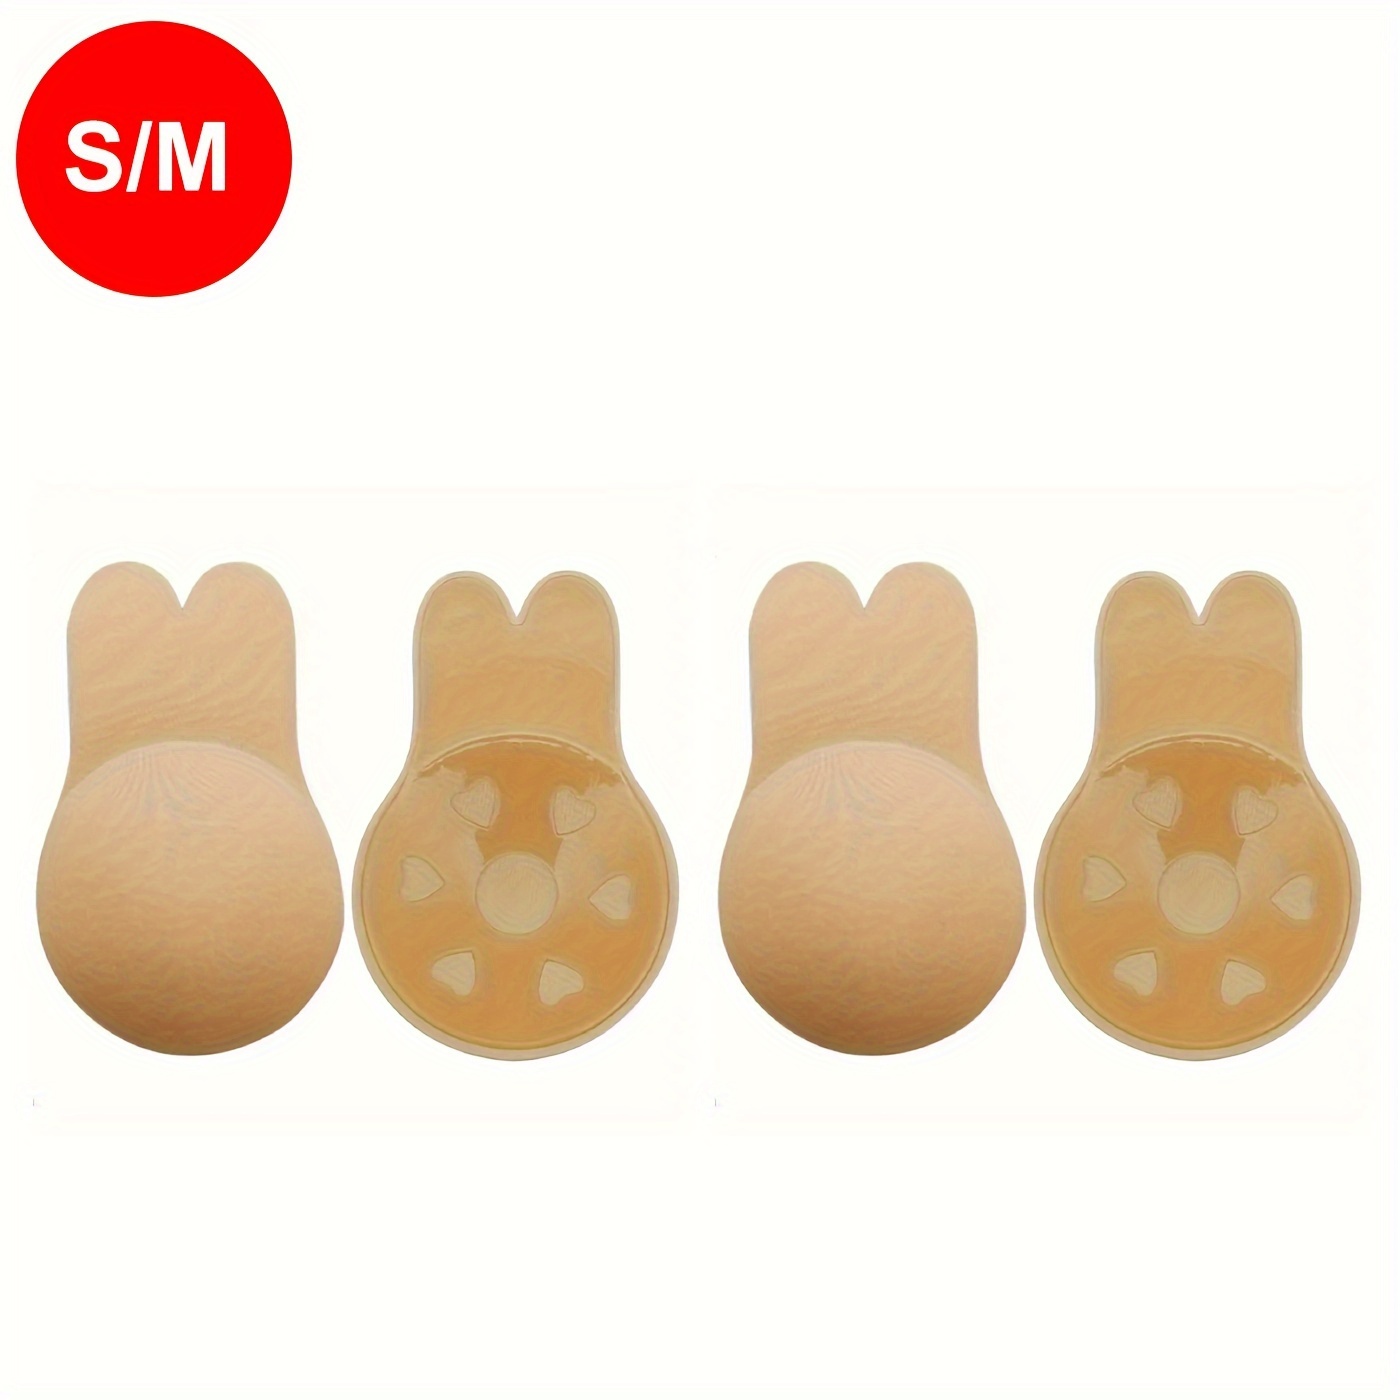 Softleaves O100 Teardrop Silicone Breast Forms pushup bra Not